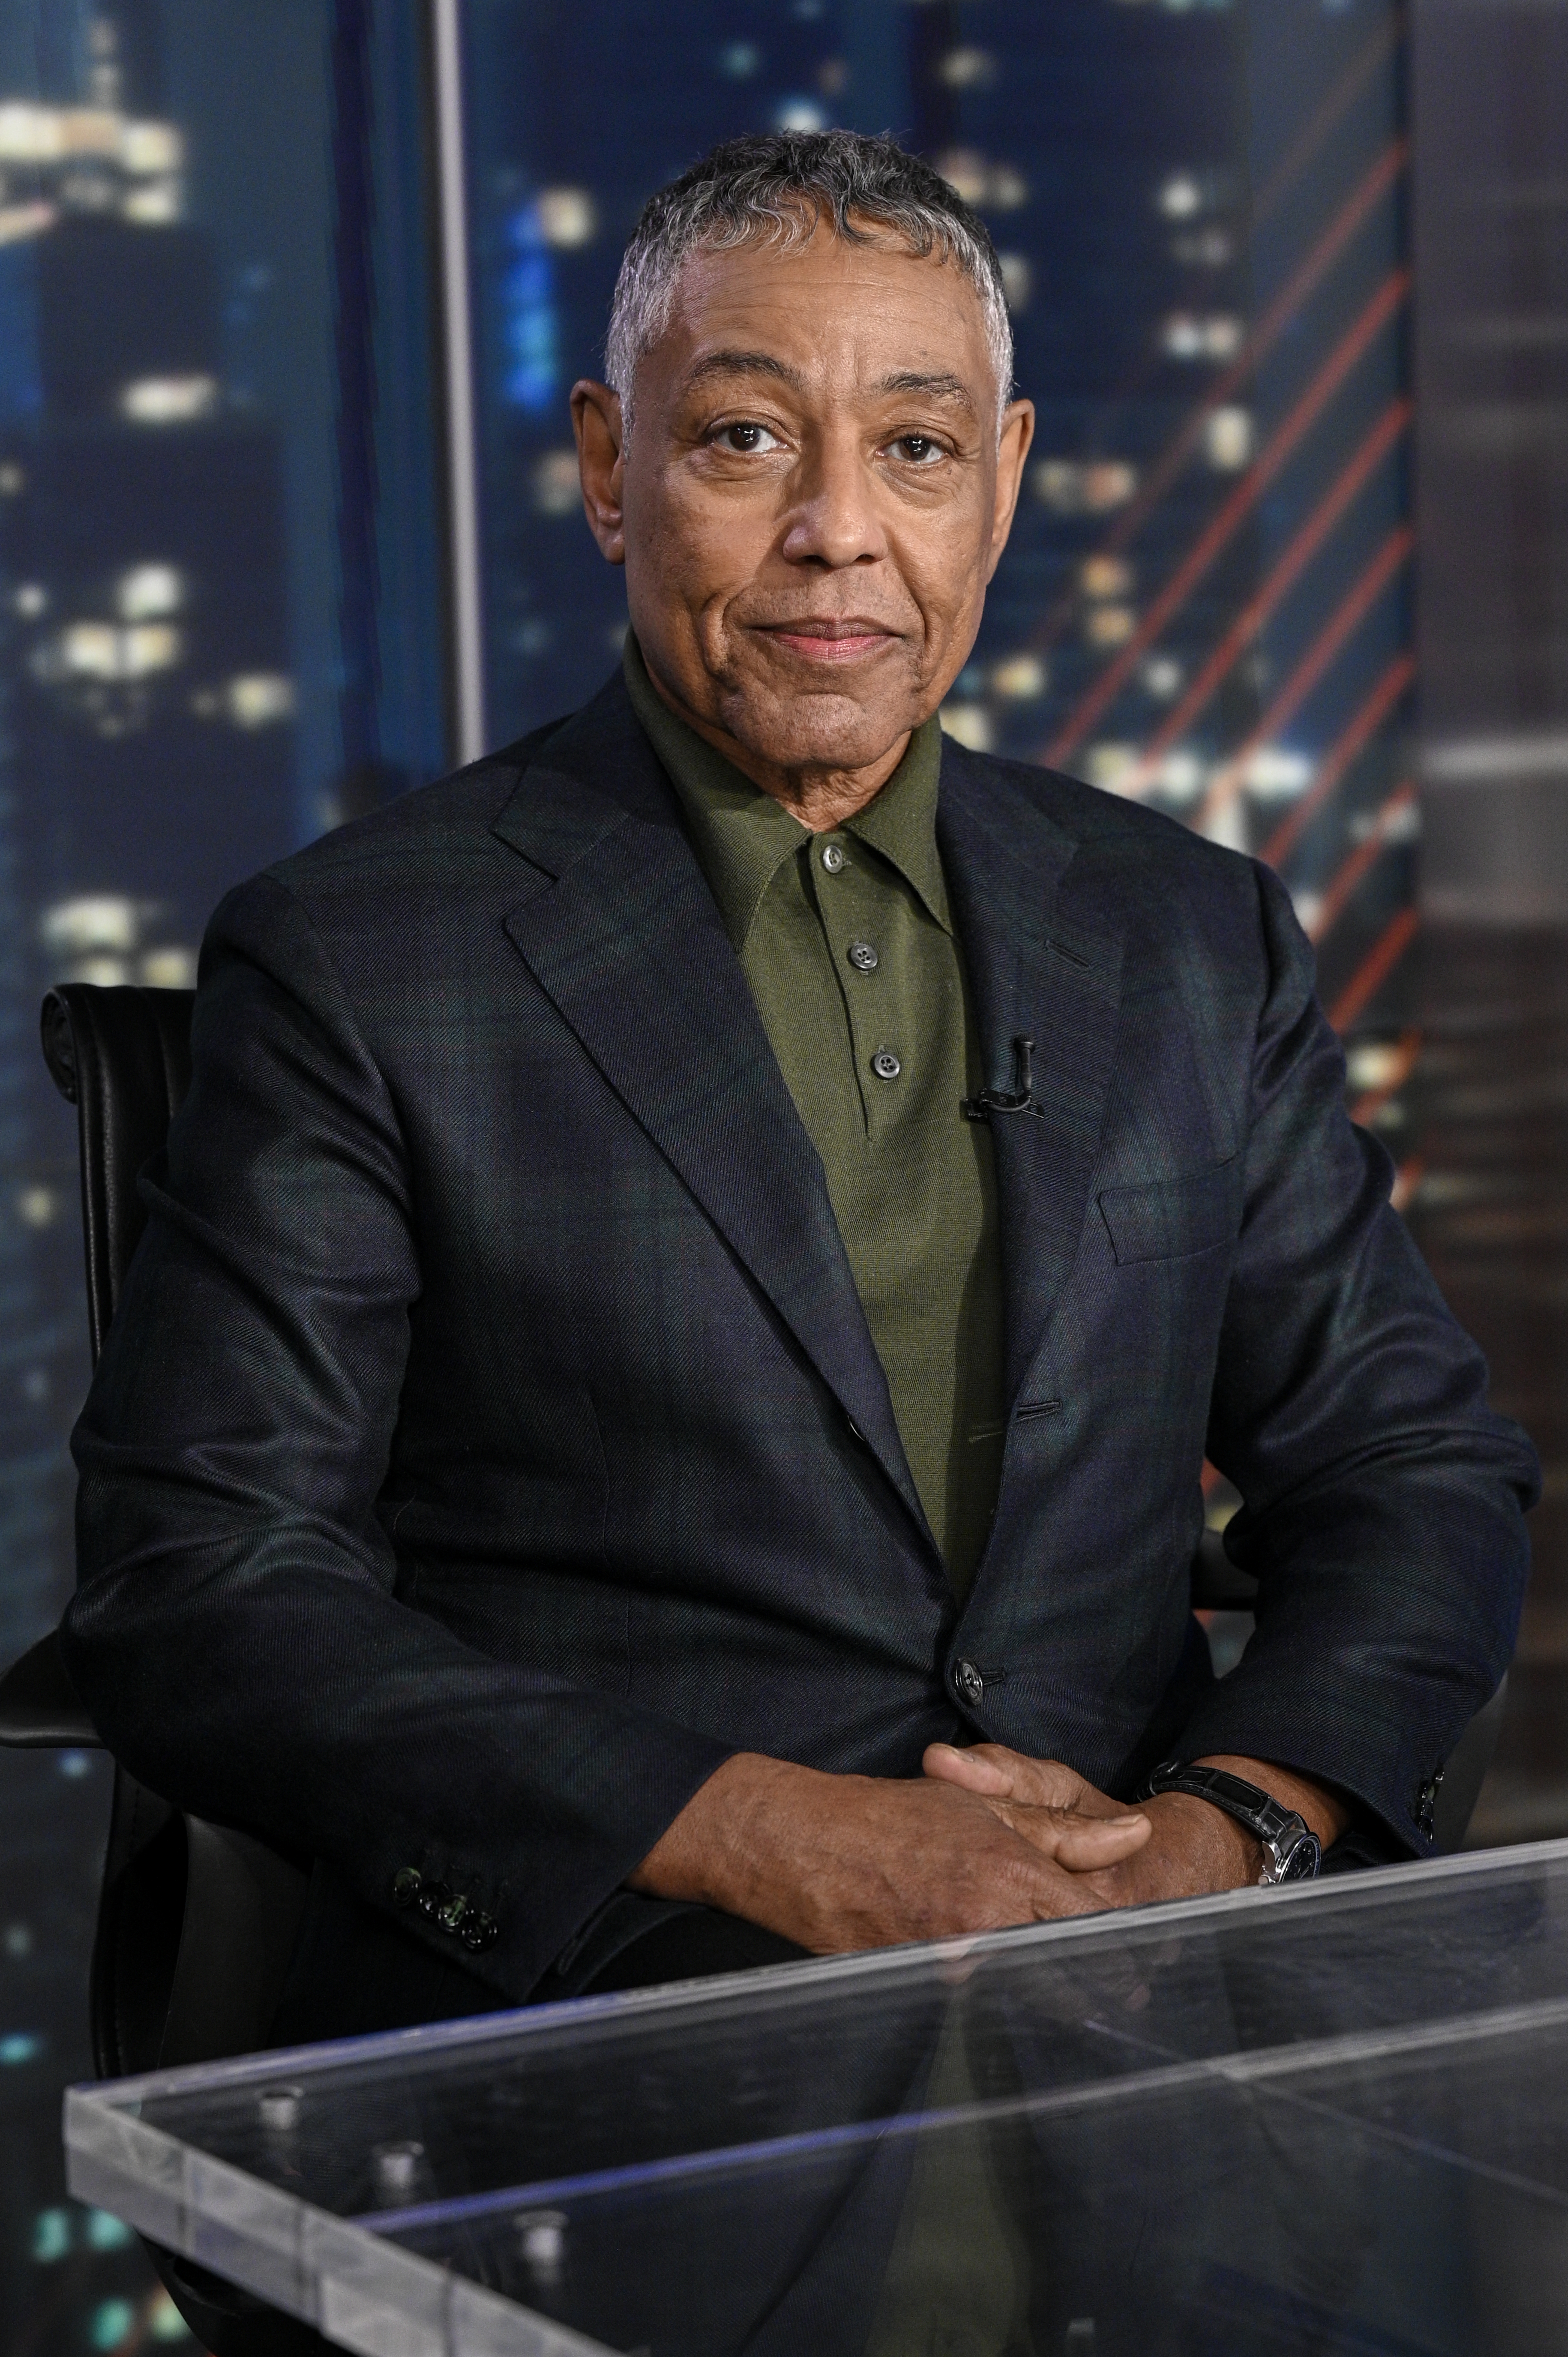 Giancarlo Esposito in a dark suit sitting at a desk, with a blurred cityscape background